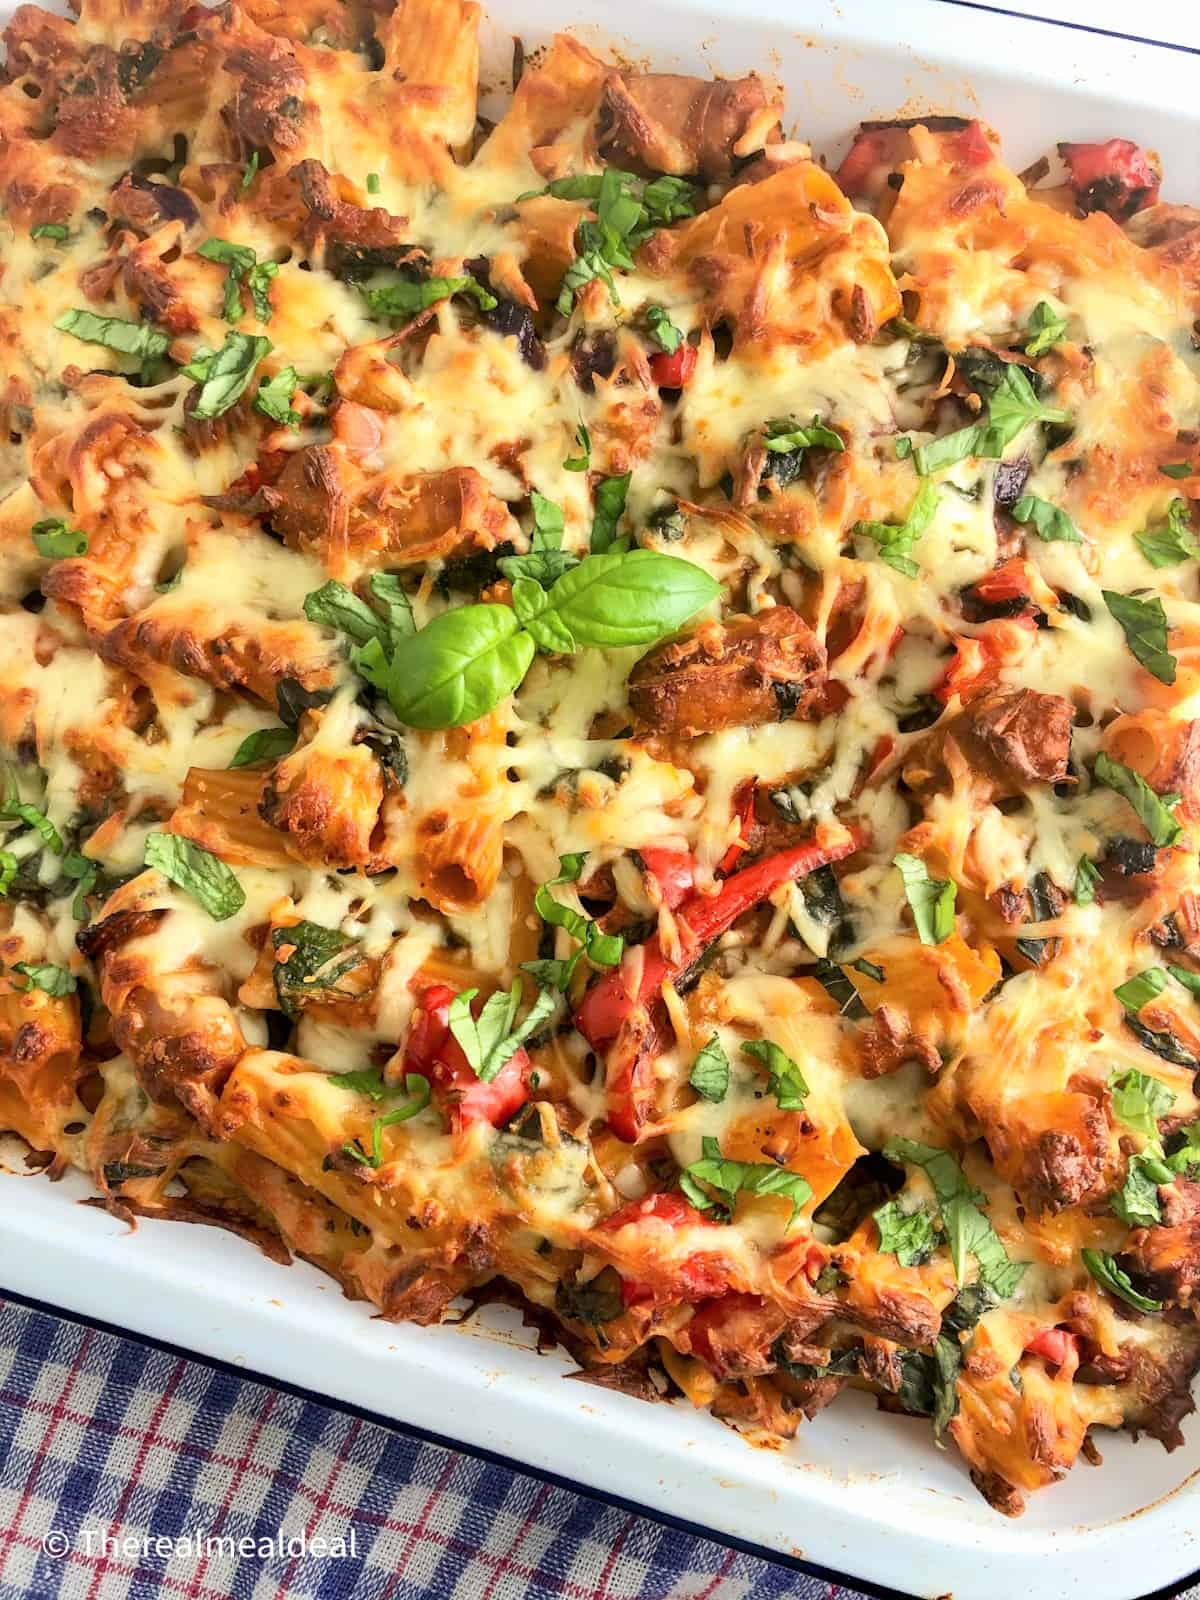 Easy Sausage Pasta Bake - The Real Meal Deal